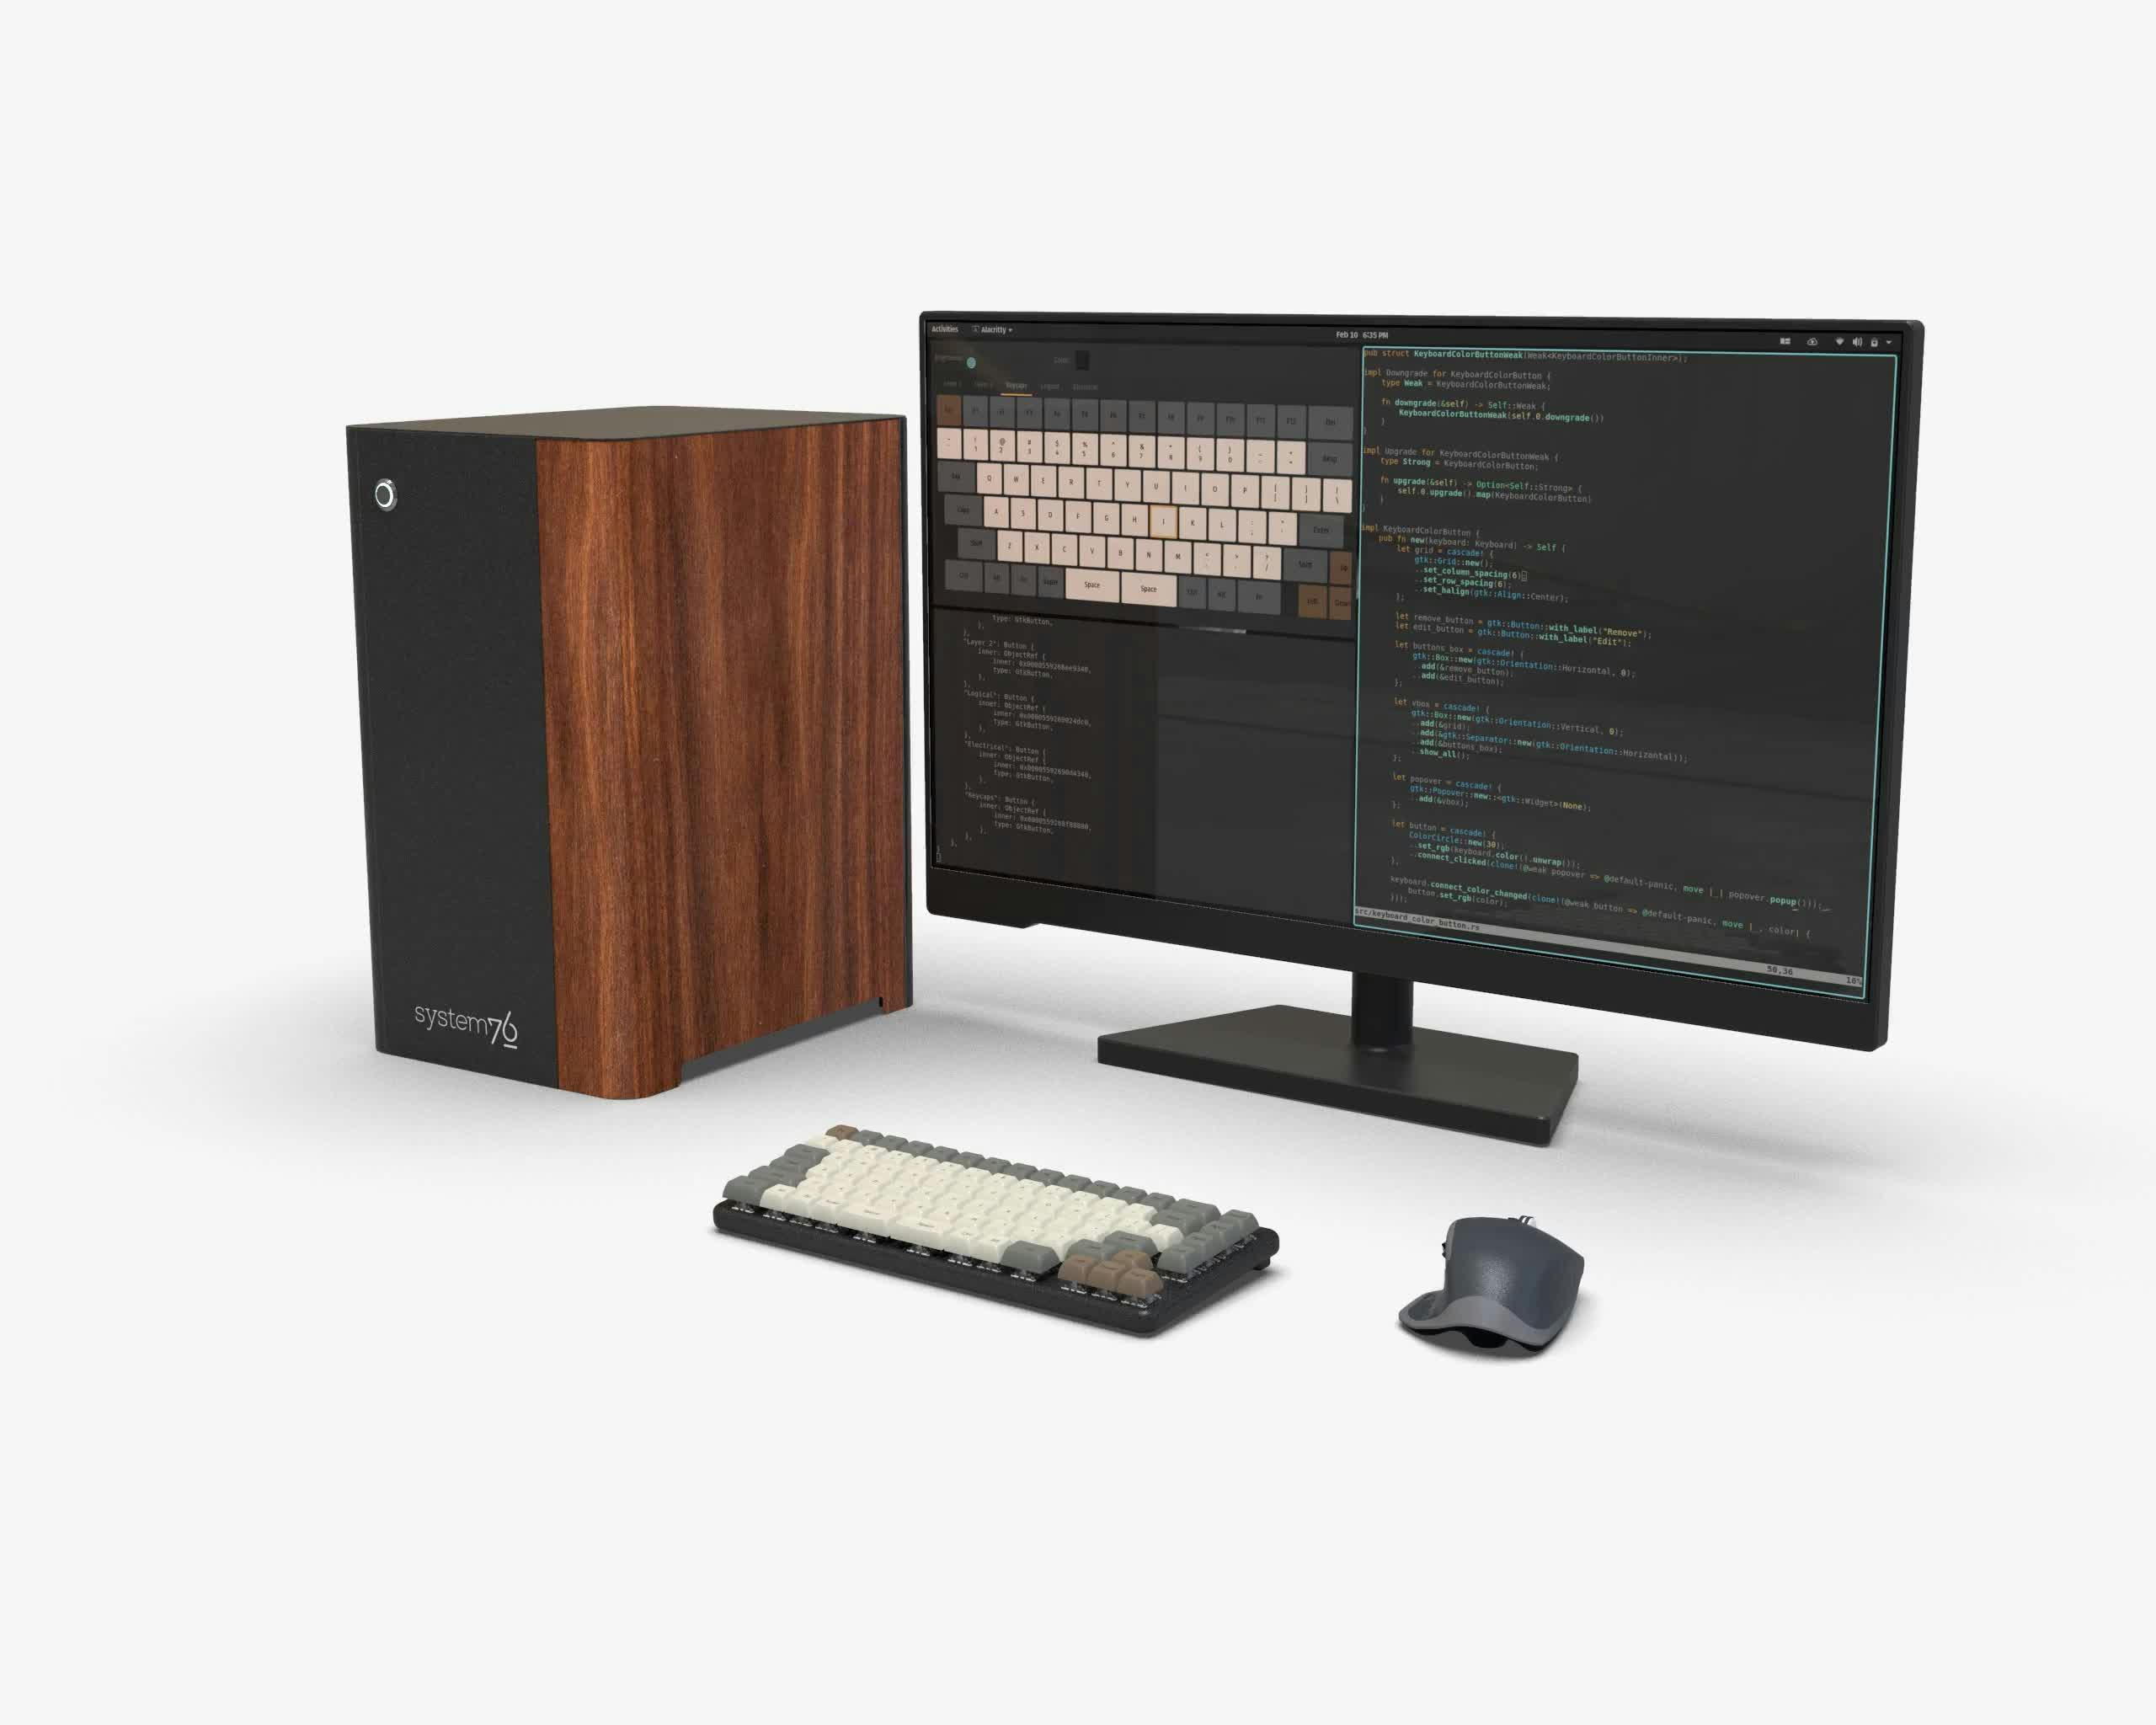 Desk setup with a Thelio workstation, an external display, and the Launch keyboard where brown, red, or blue keycaps of the Escape and Arrow keys match the colored veneer on a Thelio machine.